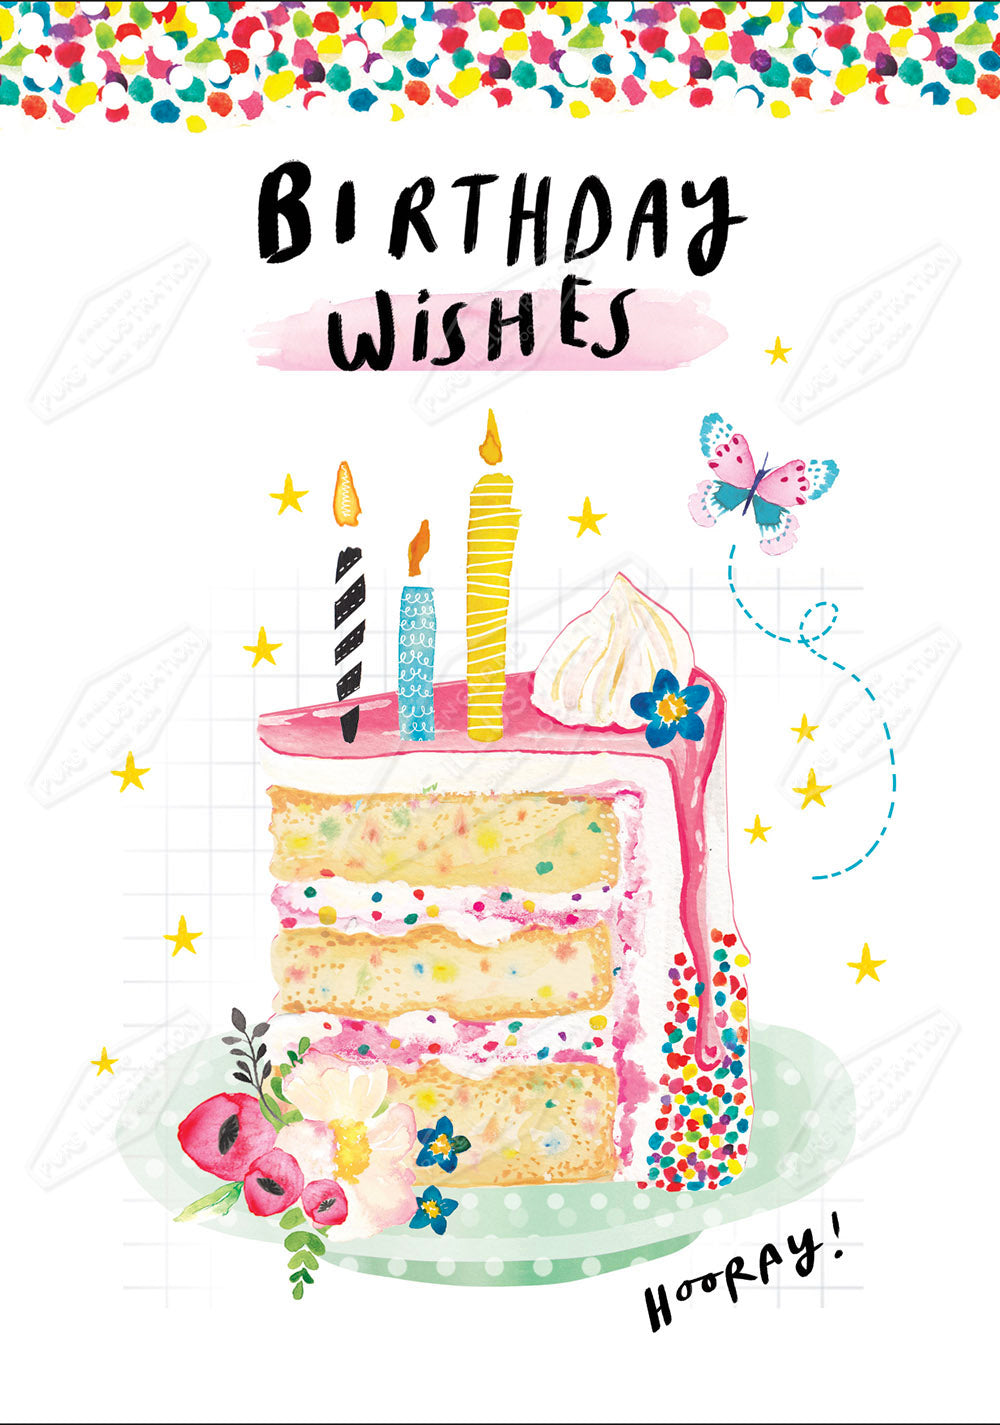 00034354EST- Emily Stalley is represented by Pure Art Licensing Agency - Birthday Greeting Card Design